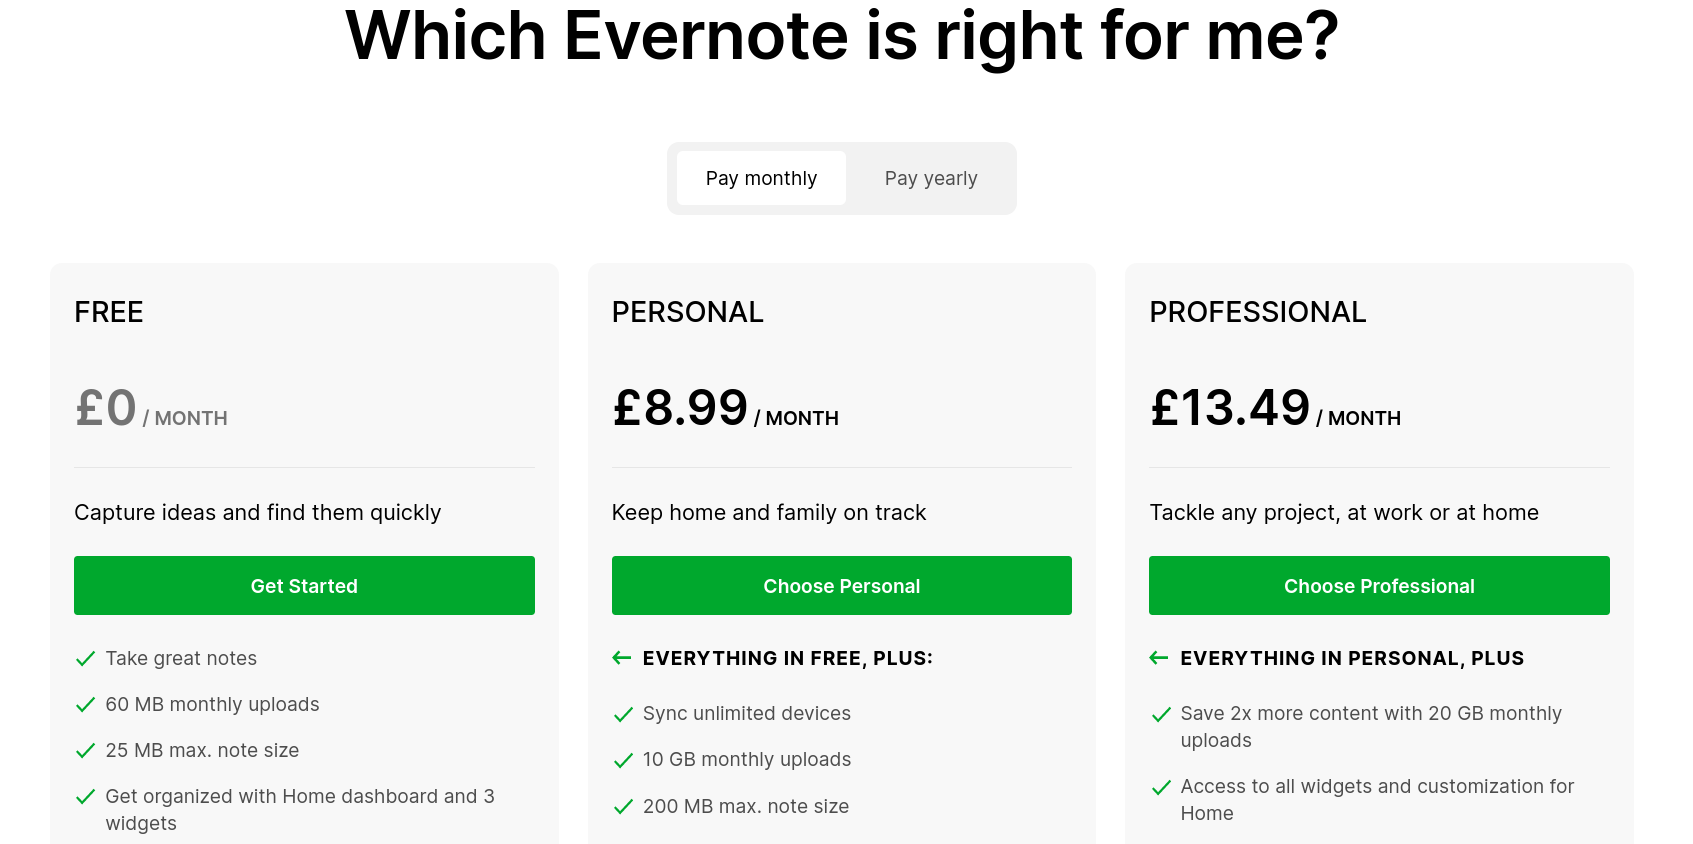 Evernote plans ranging from free to 13.49 per month